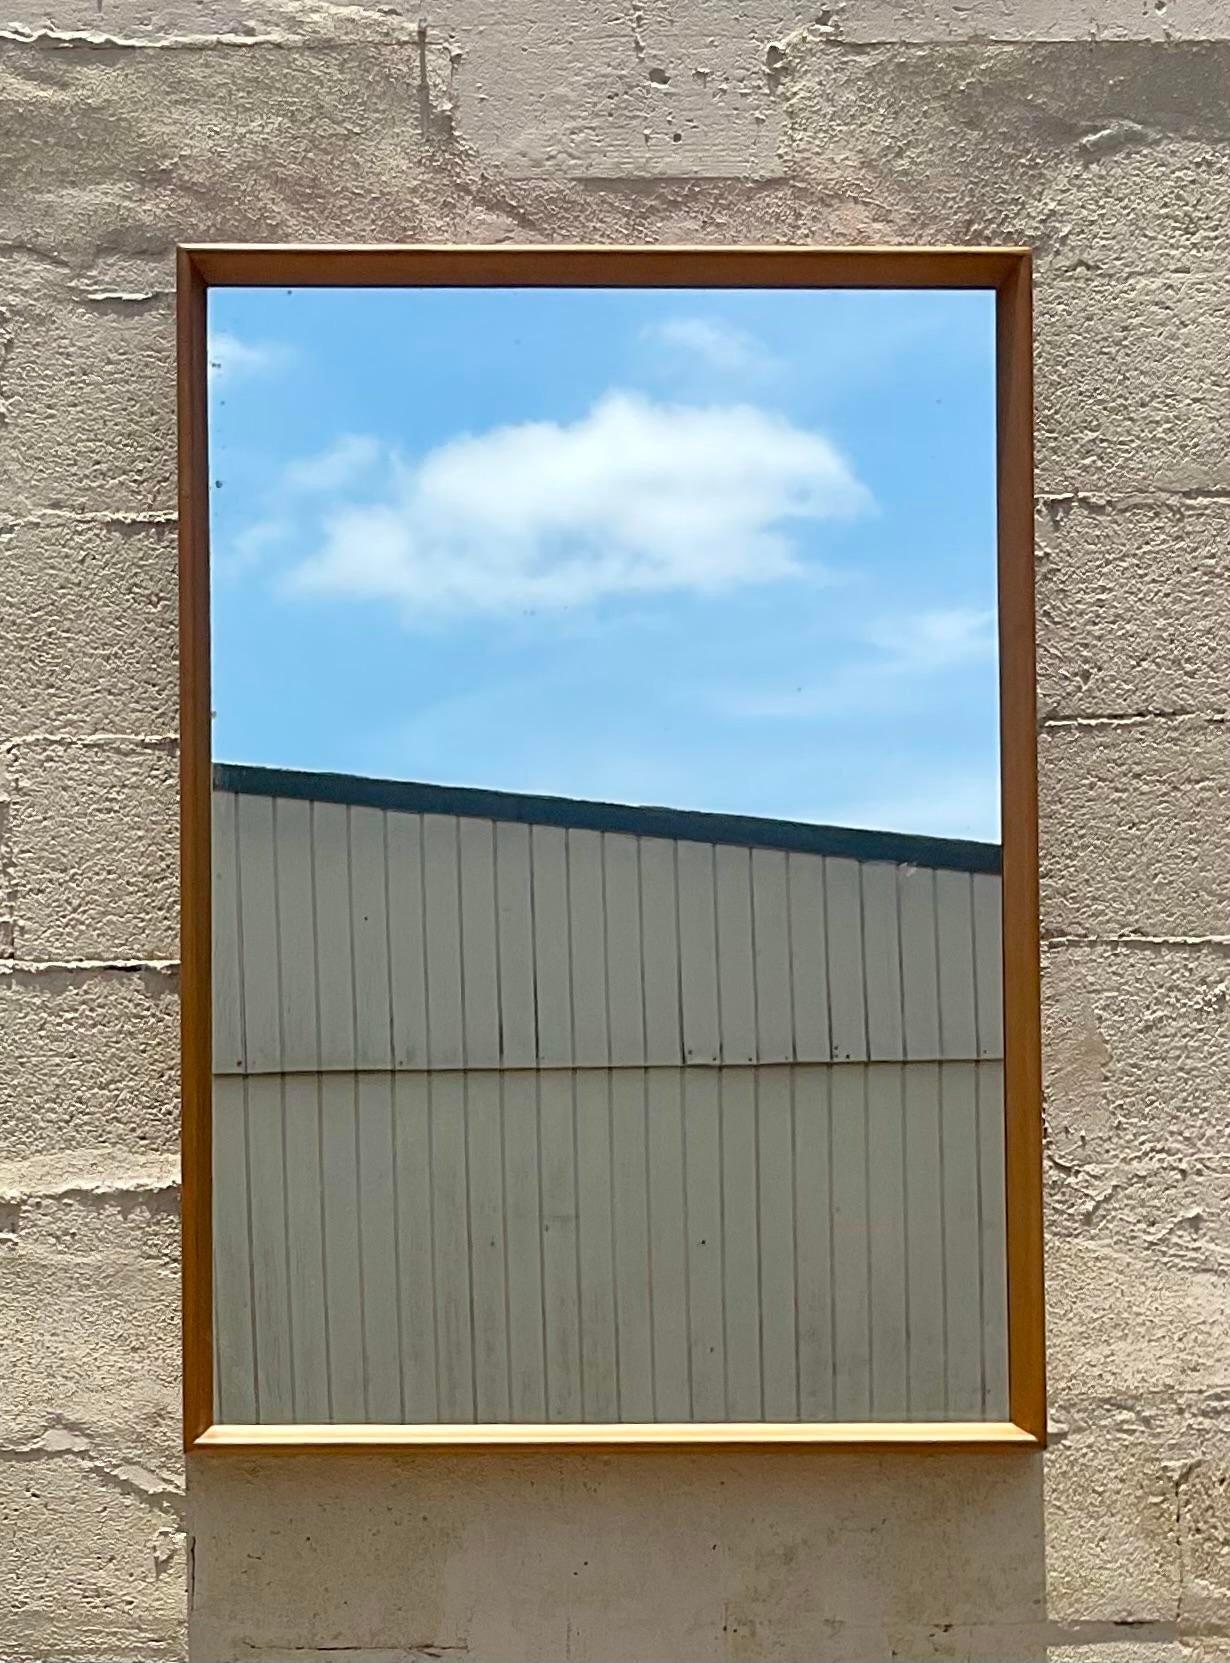 A fabulous vintage MCM wall mirror. A chic and simple design with a solid maple wood frame. Done in the manner of a Heywood Wakefield. Acquired from a Palm Beach estate.